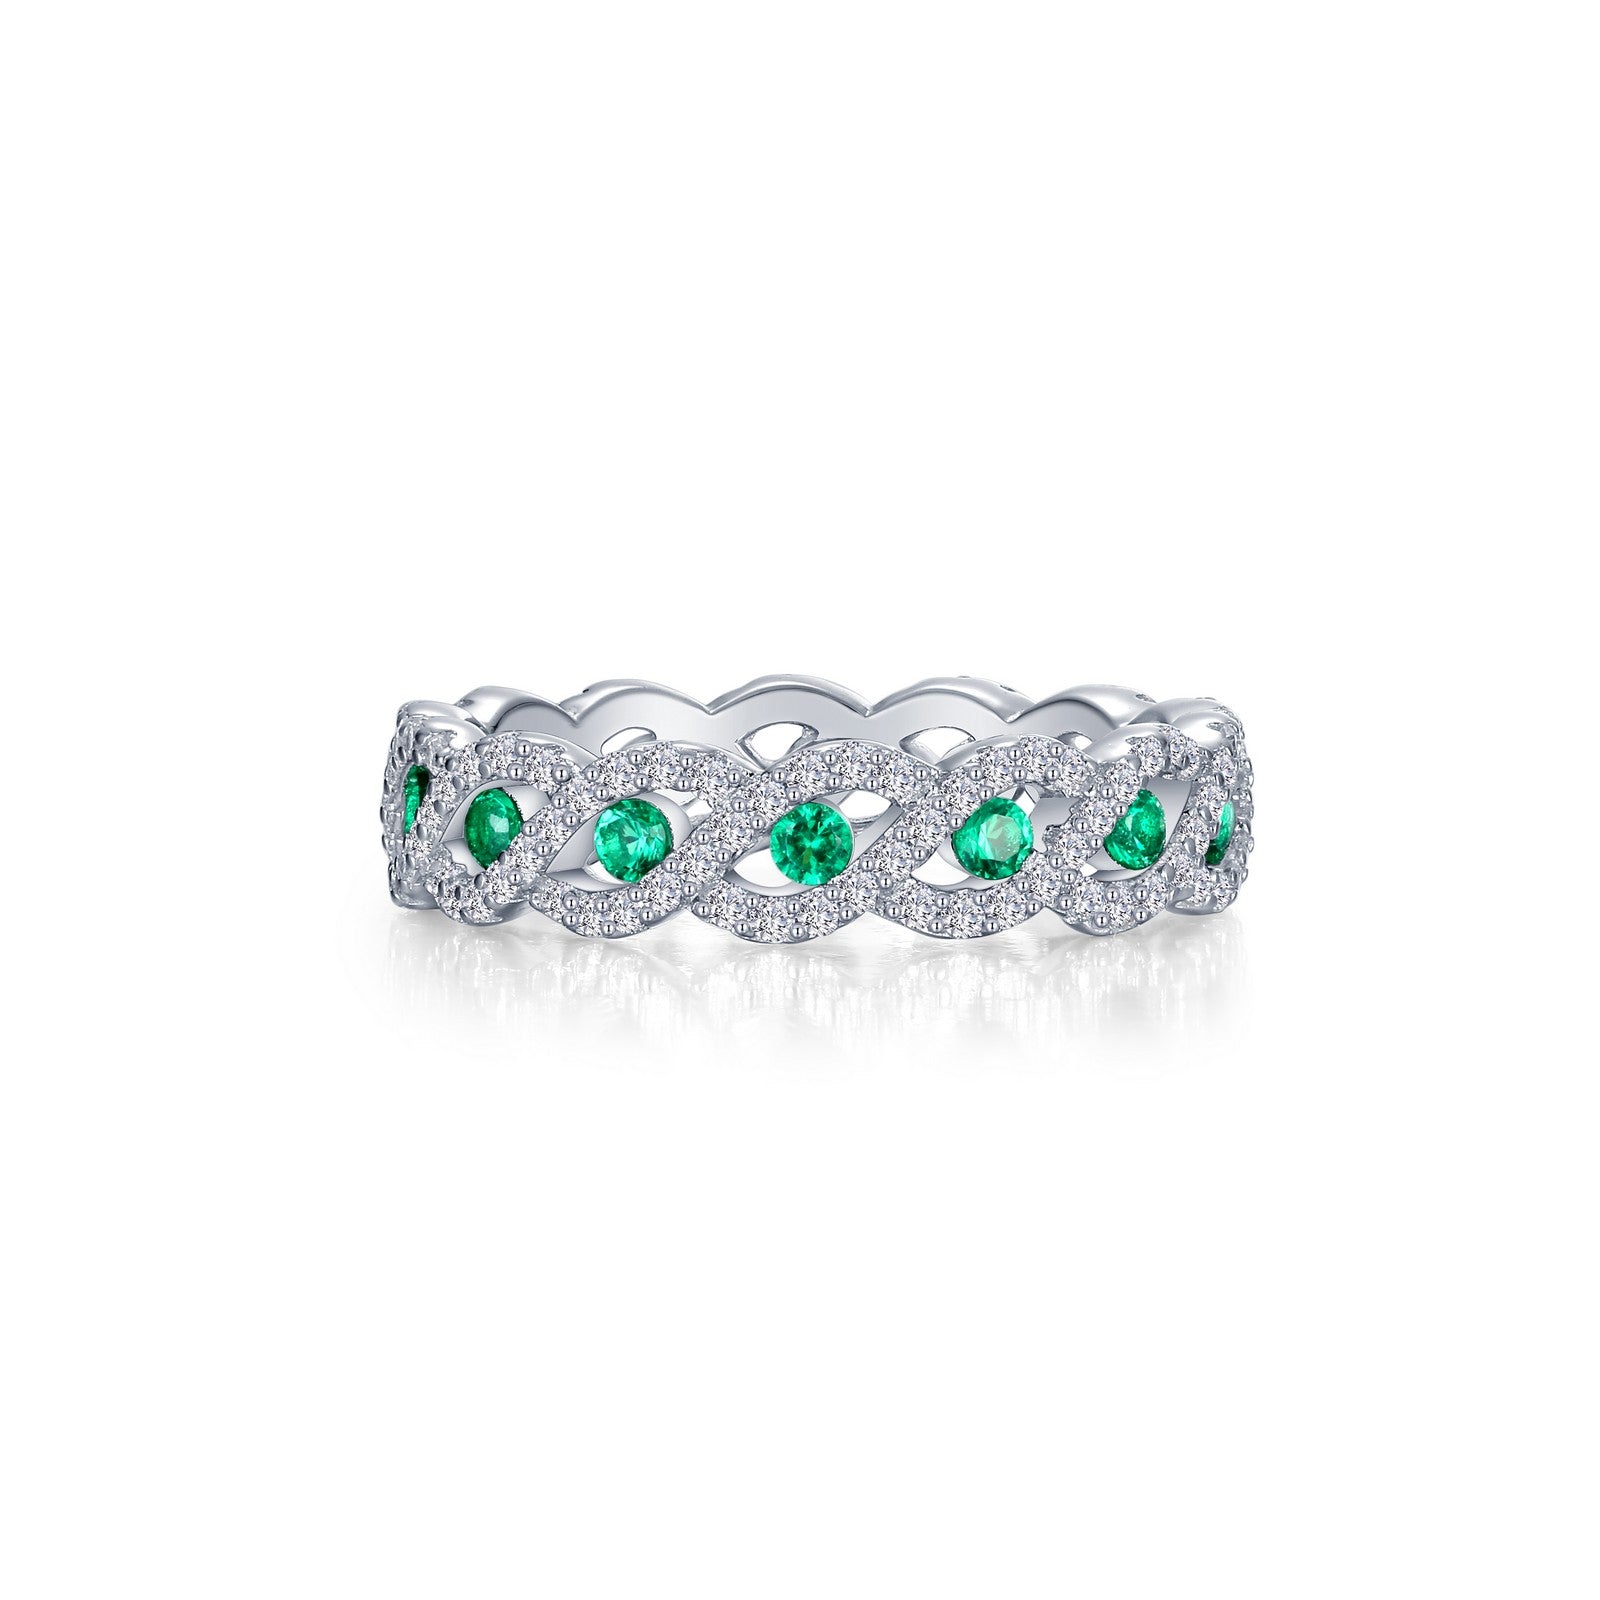 SS 1.82ctw Simulated Diamond and Emerald Twist Eternity Band